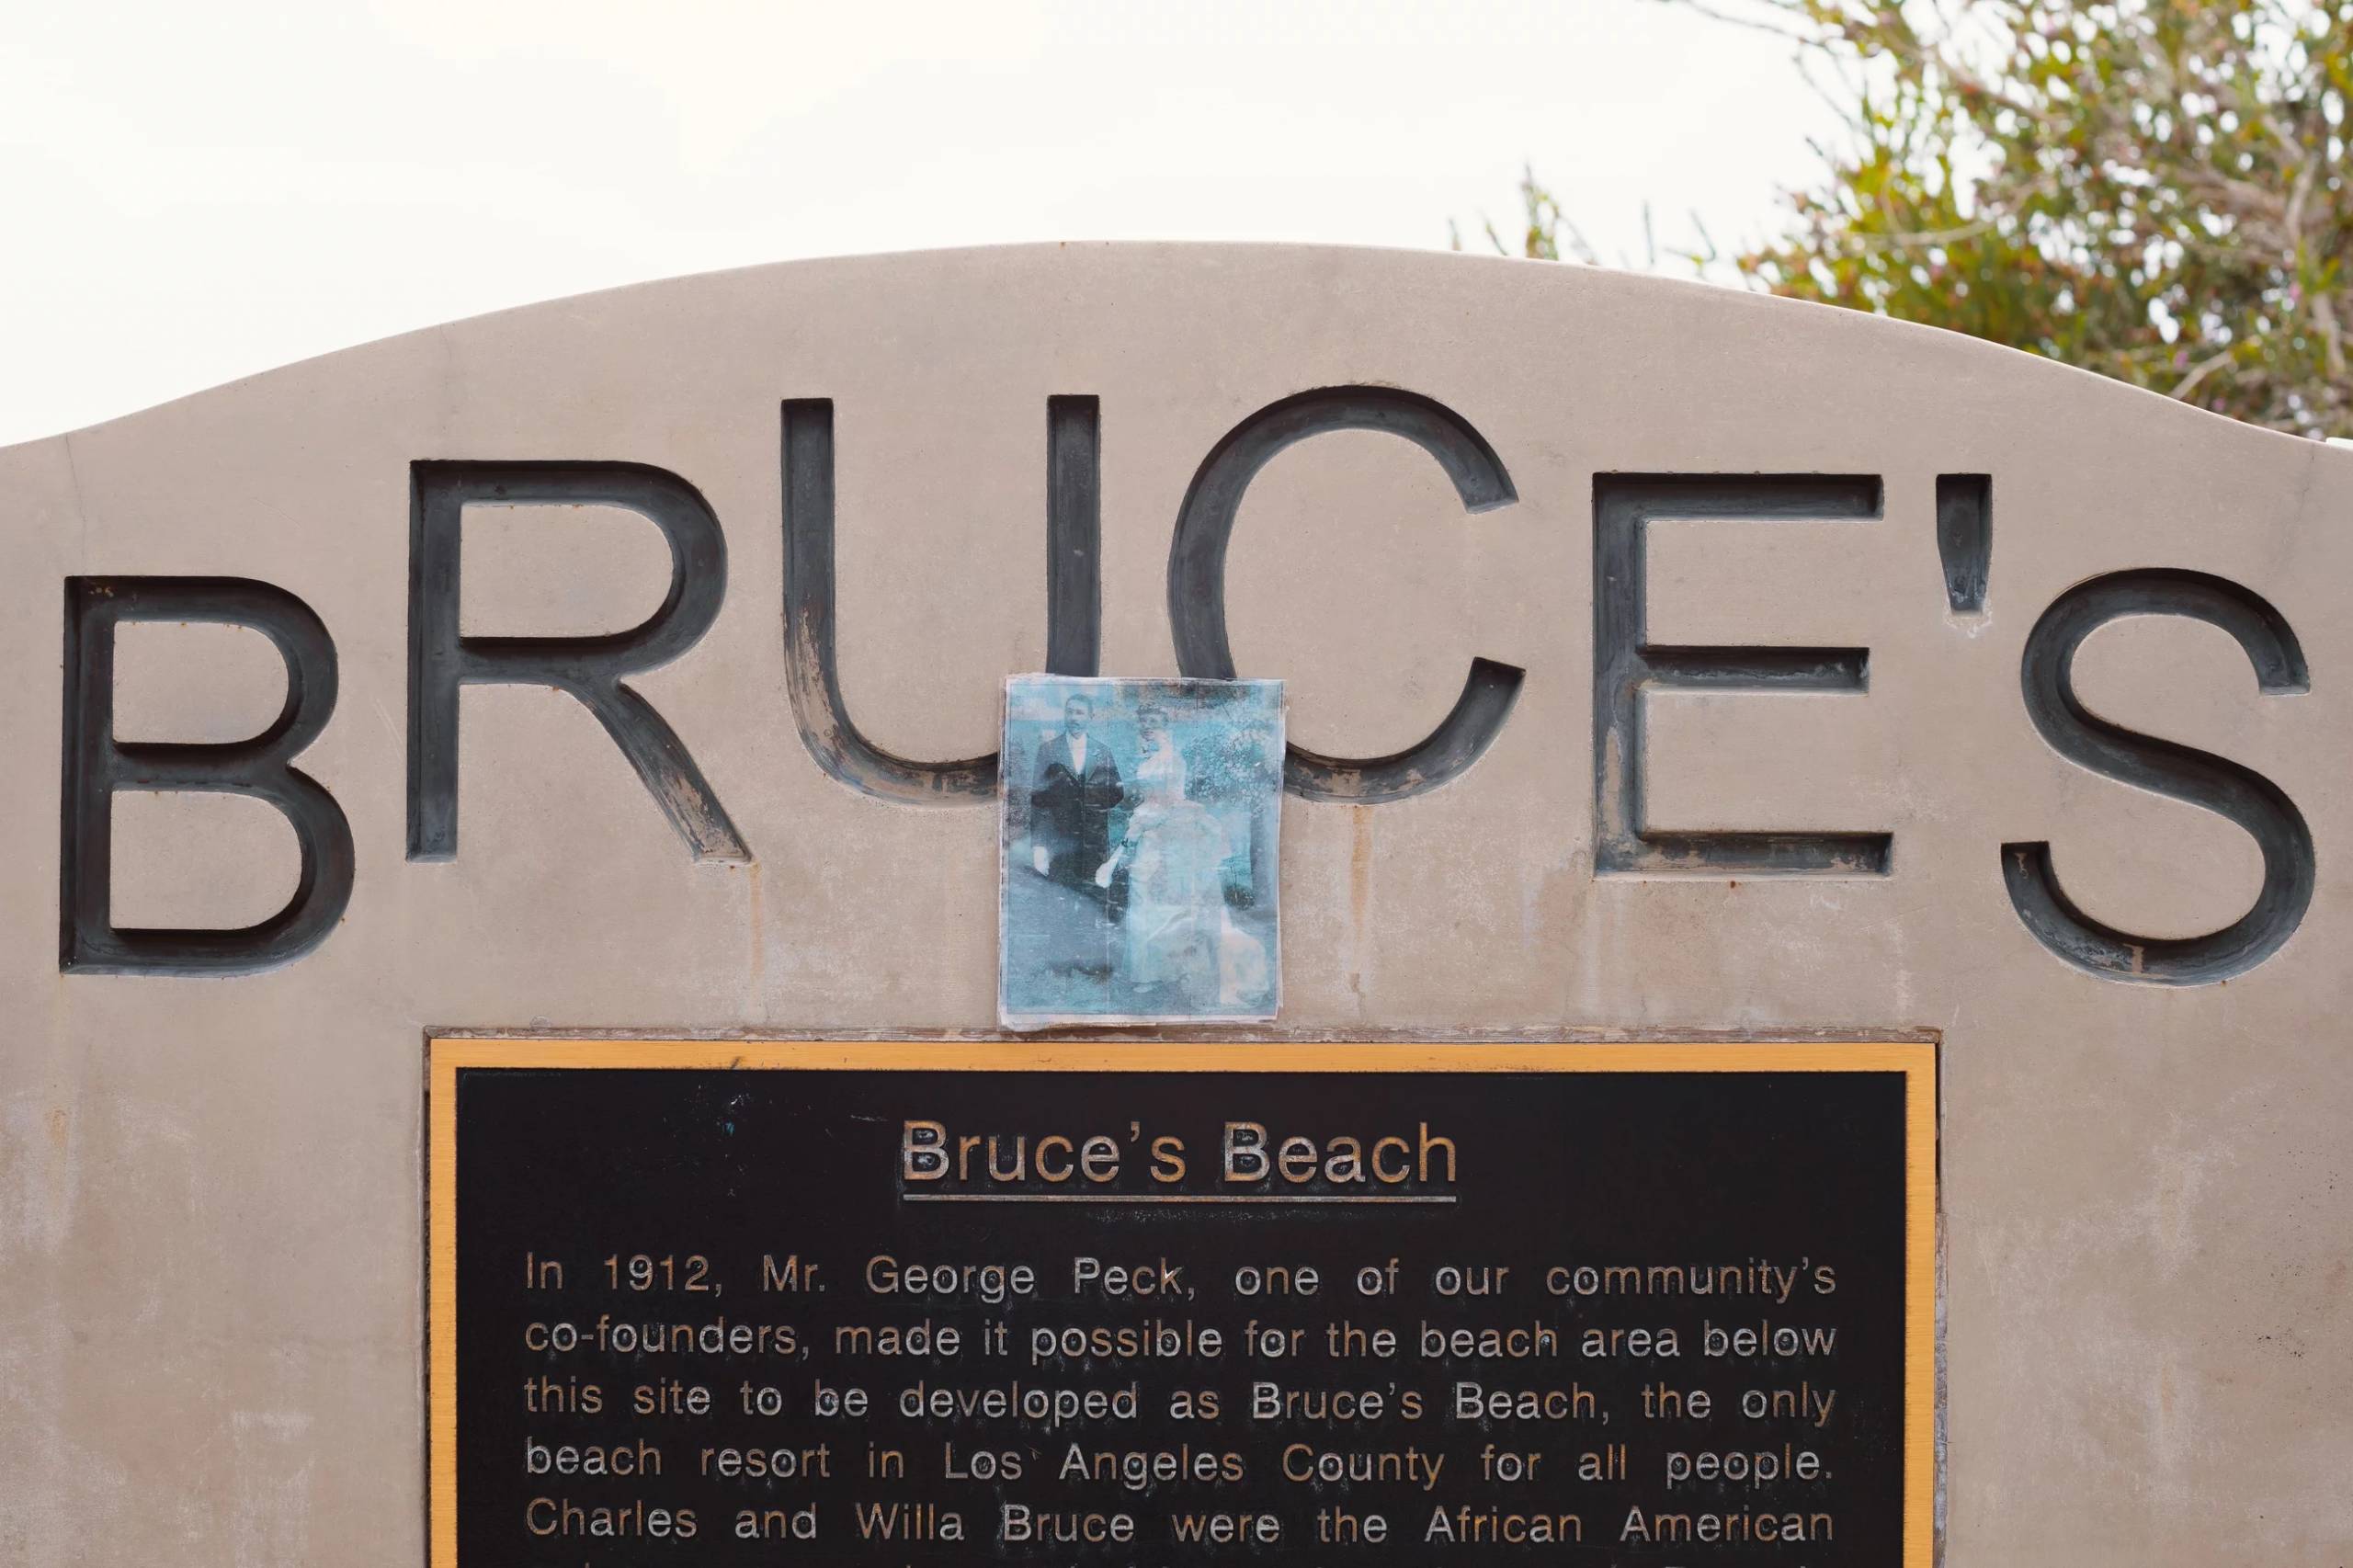 A monument saying "Bruce's" with a plaque engraved on it, with a laminated photograph propped on the plaque.